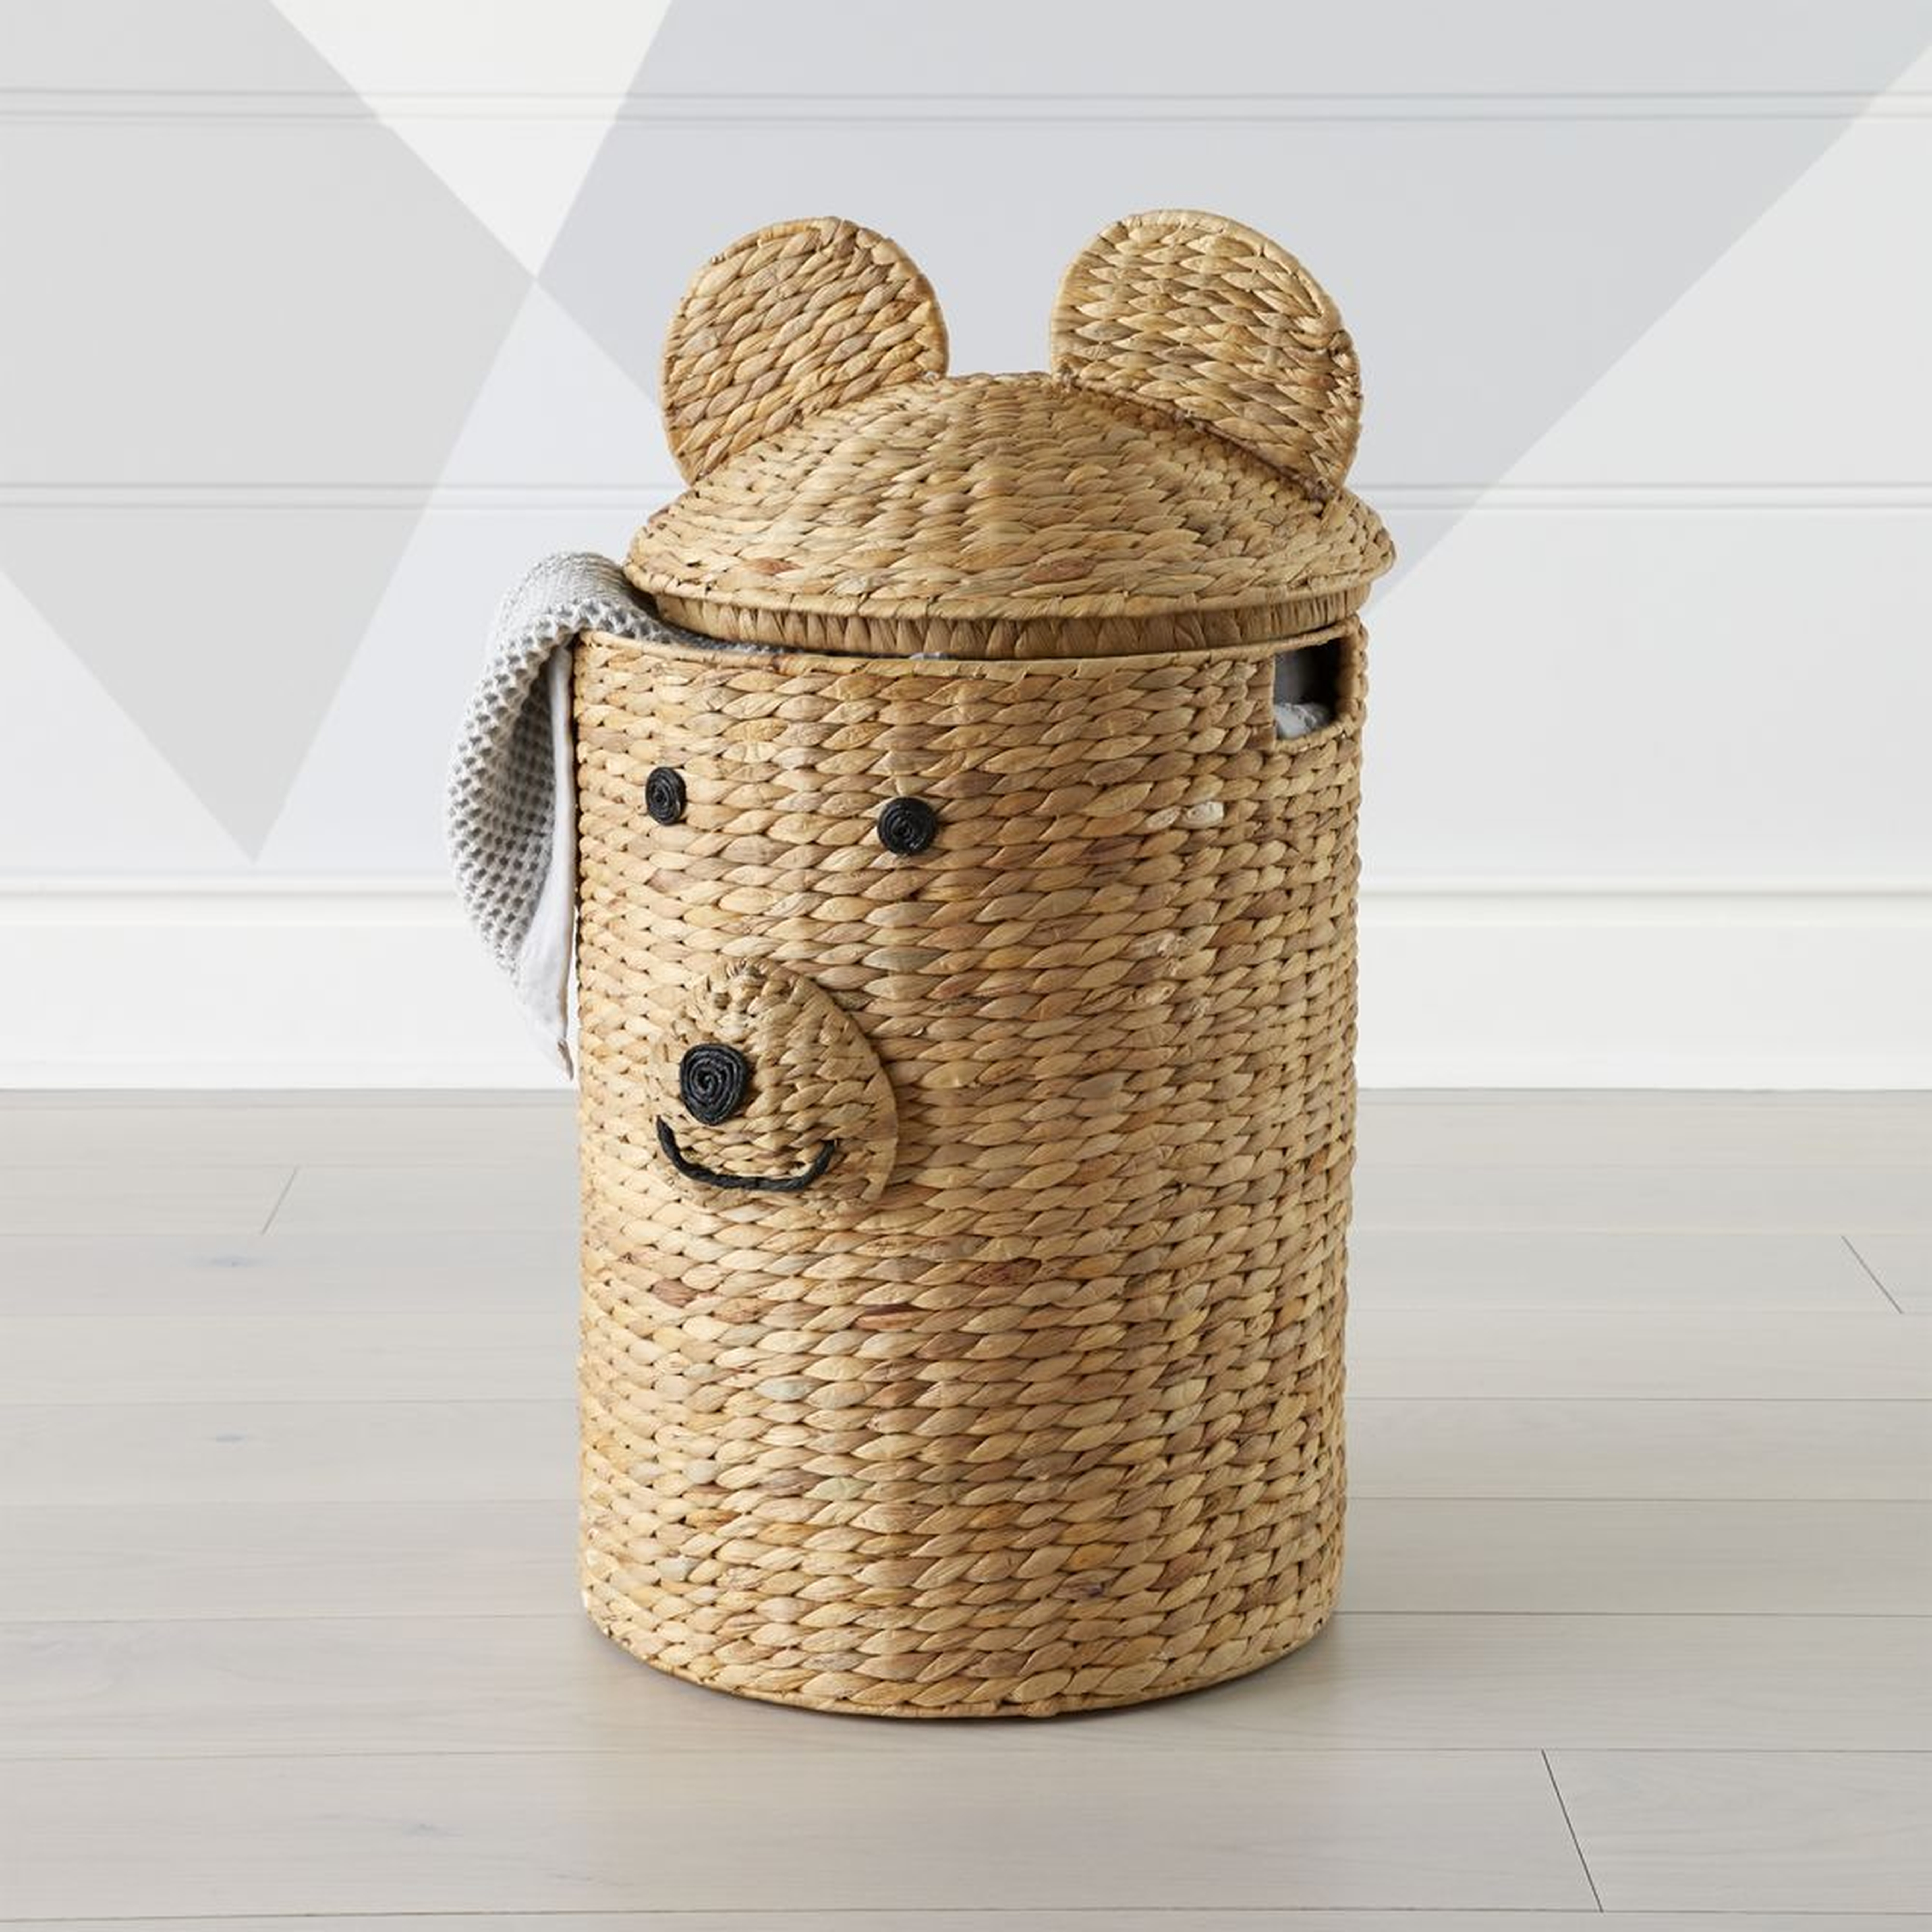 Bear Woven Kids Hamper with Handles - Crate and Barrel